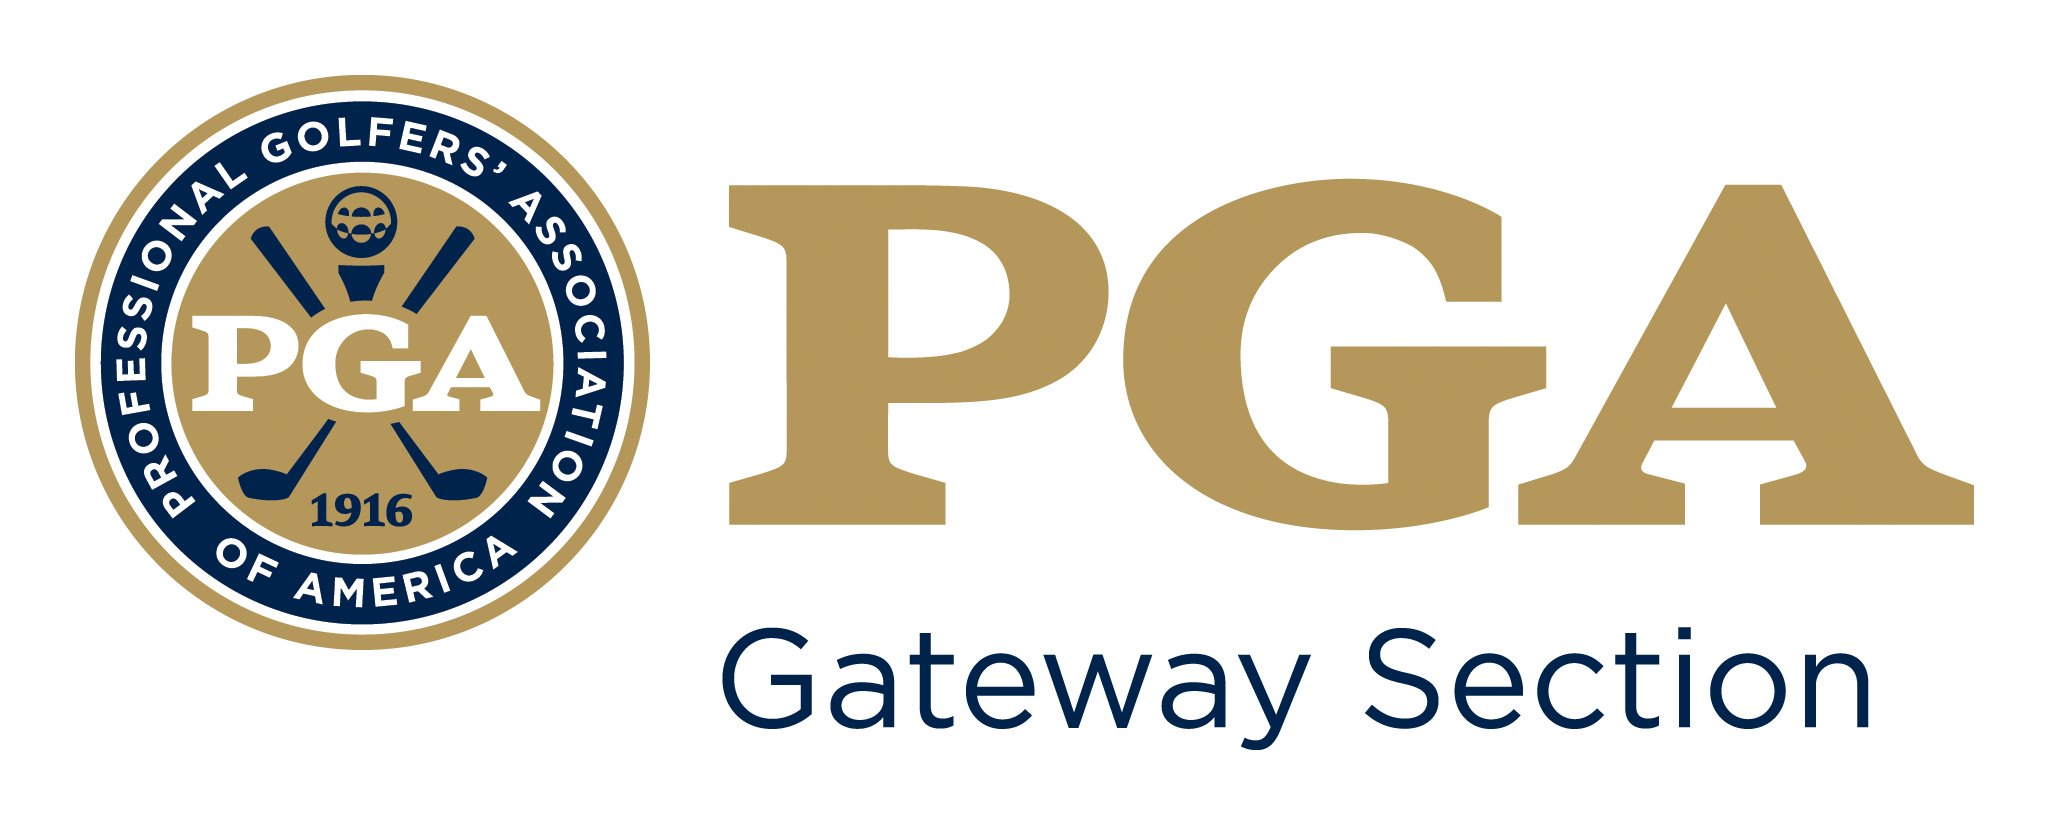 PGA Gateway Section primary logo in high resolution